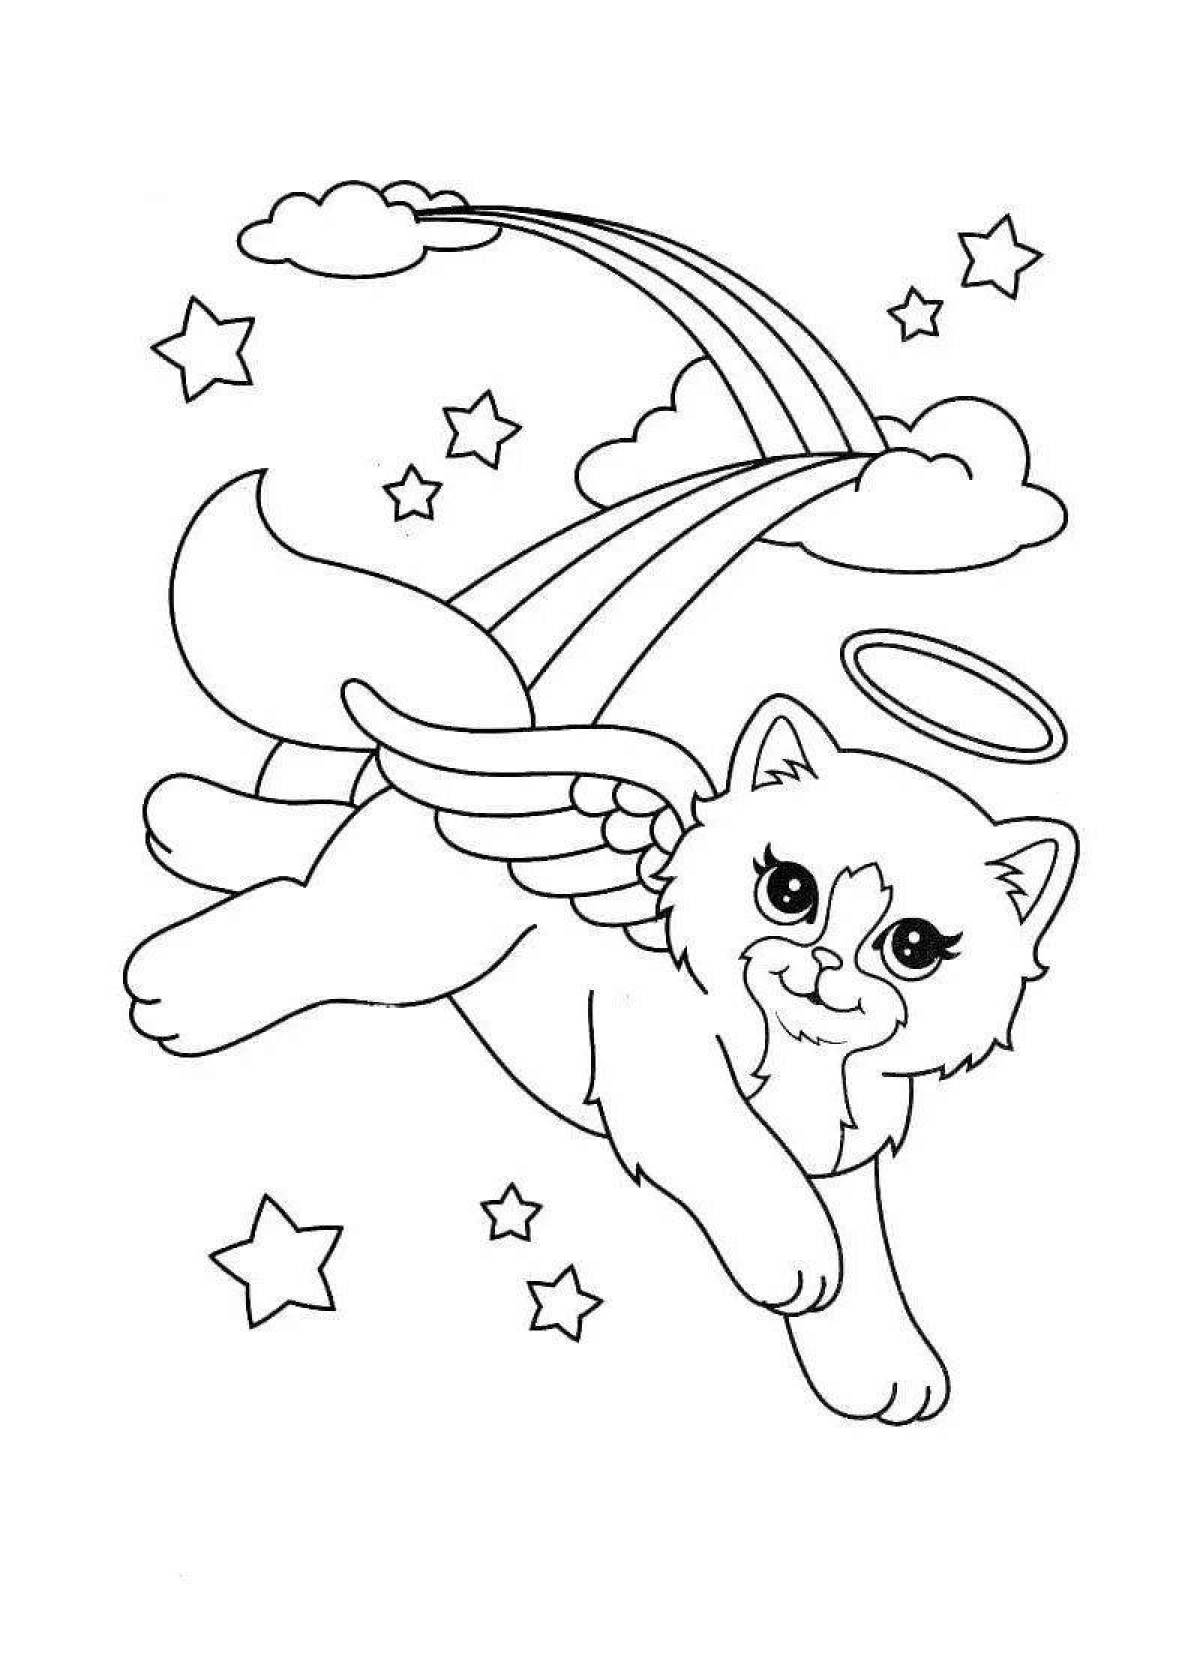 Coloring page elegant flying cat